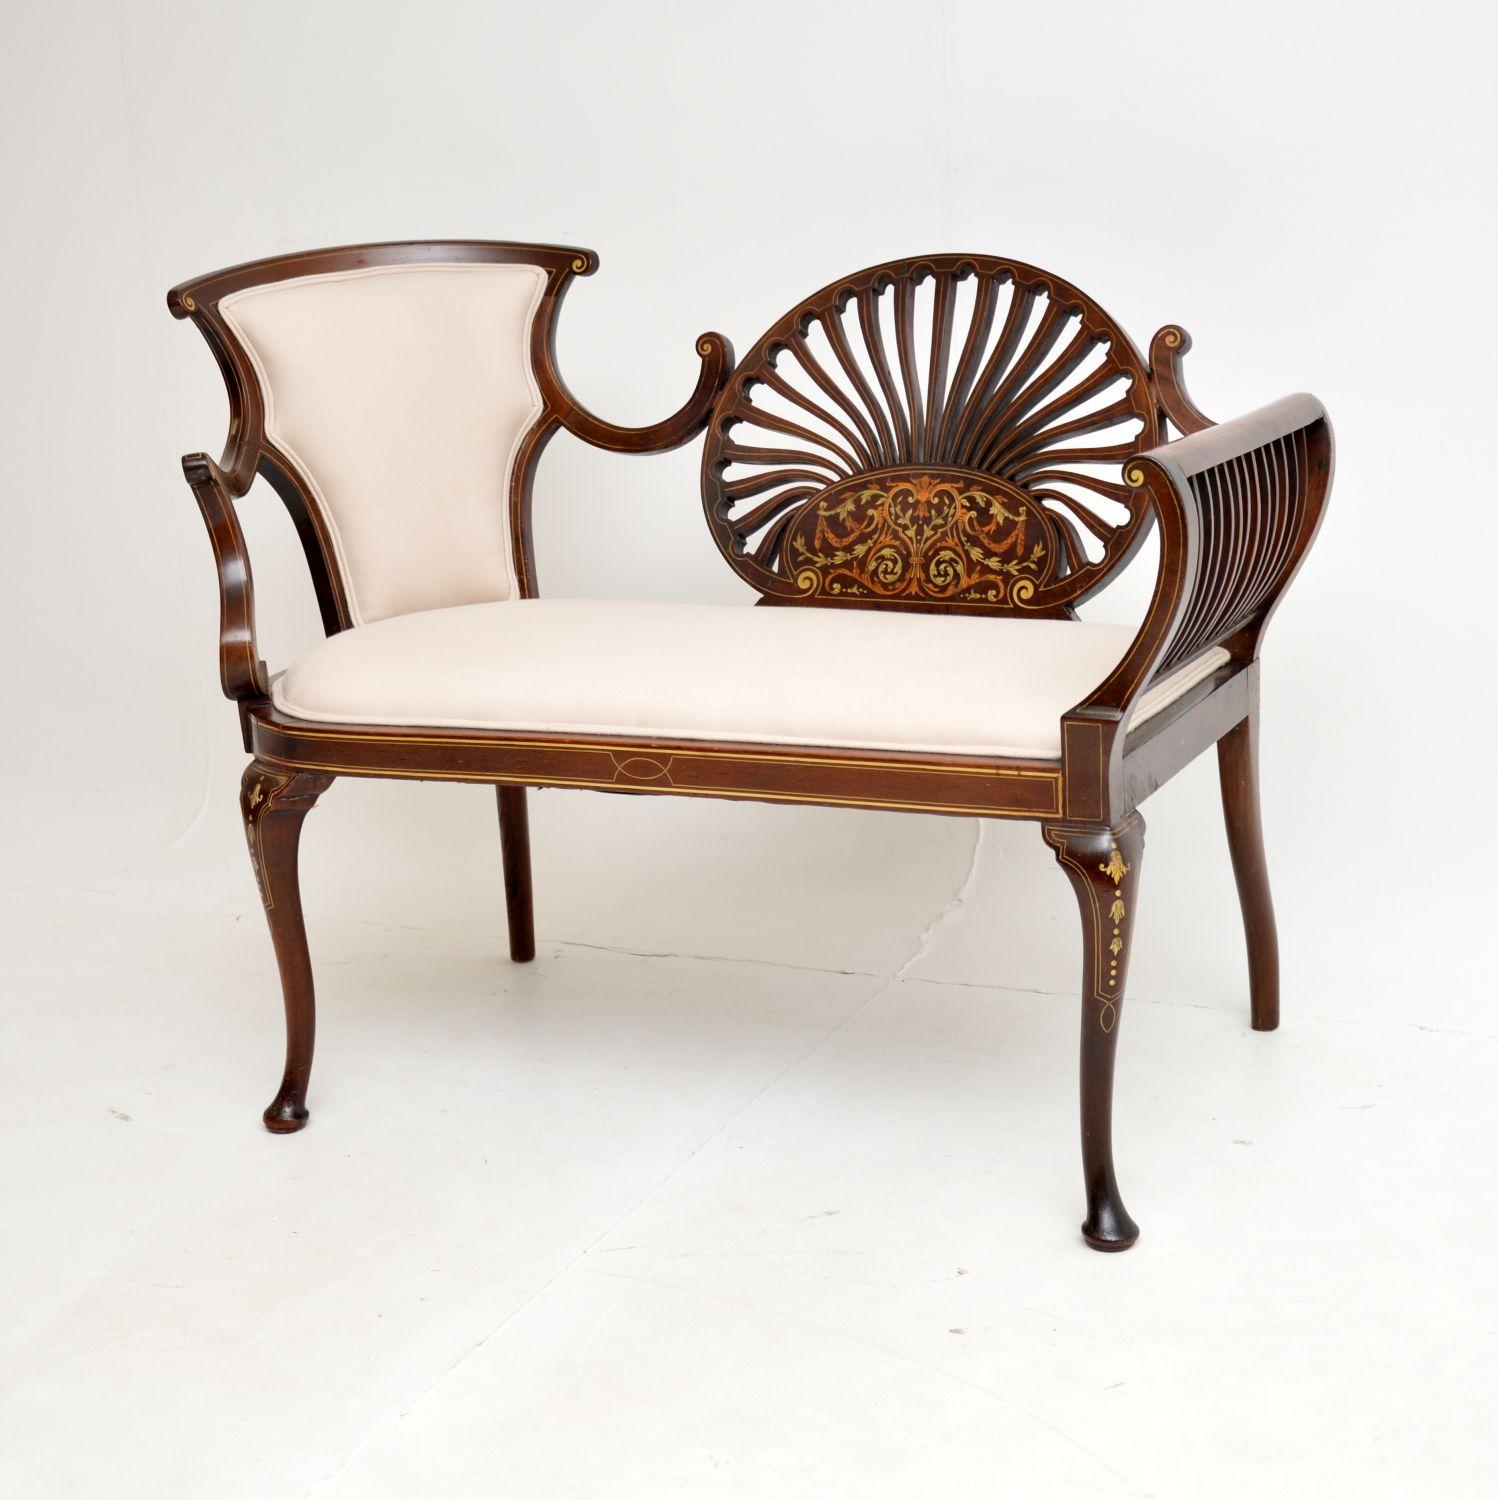 A stunning antique Edwardian settee. This was made in England, it dates from the 1890-1900 period.

It has a gorgeous and very elegant design, the quality is outstanding. It is fully upholstered on the seat and one side of the back, the back rest